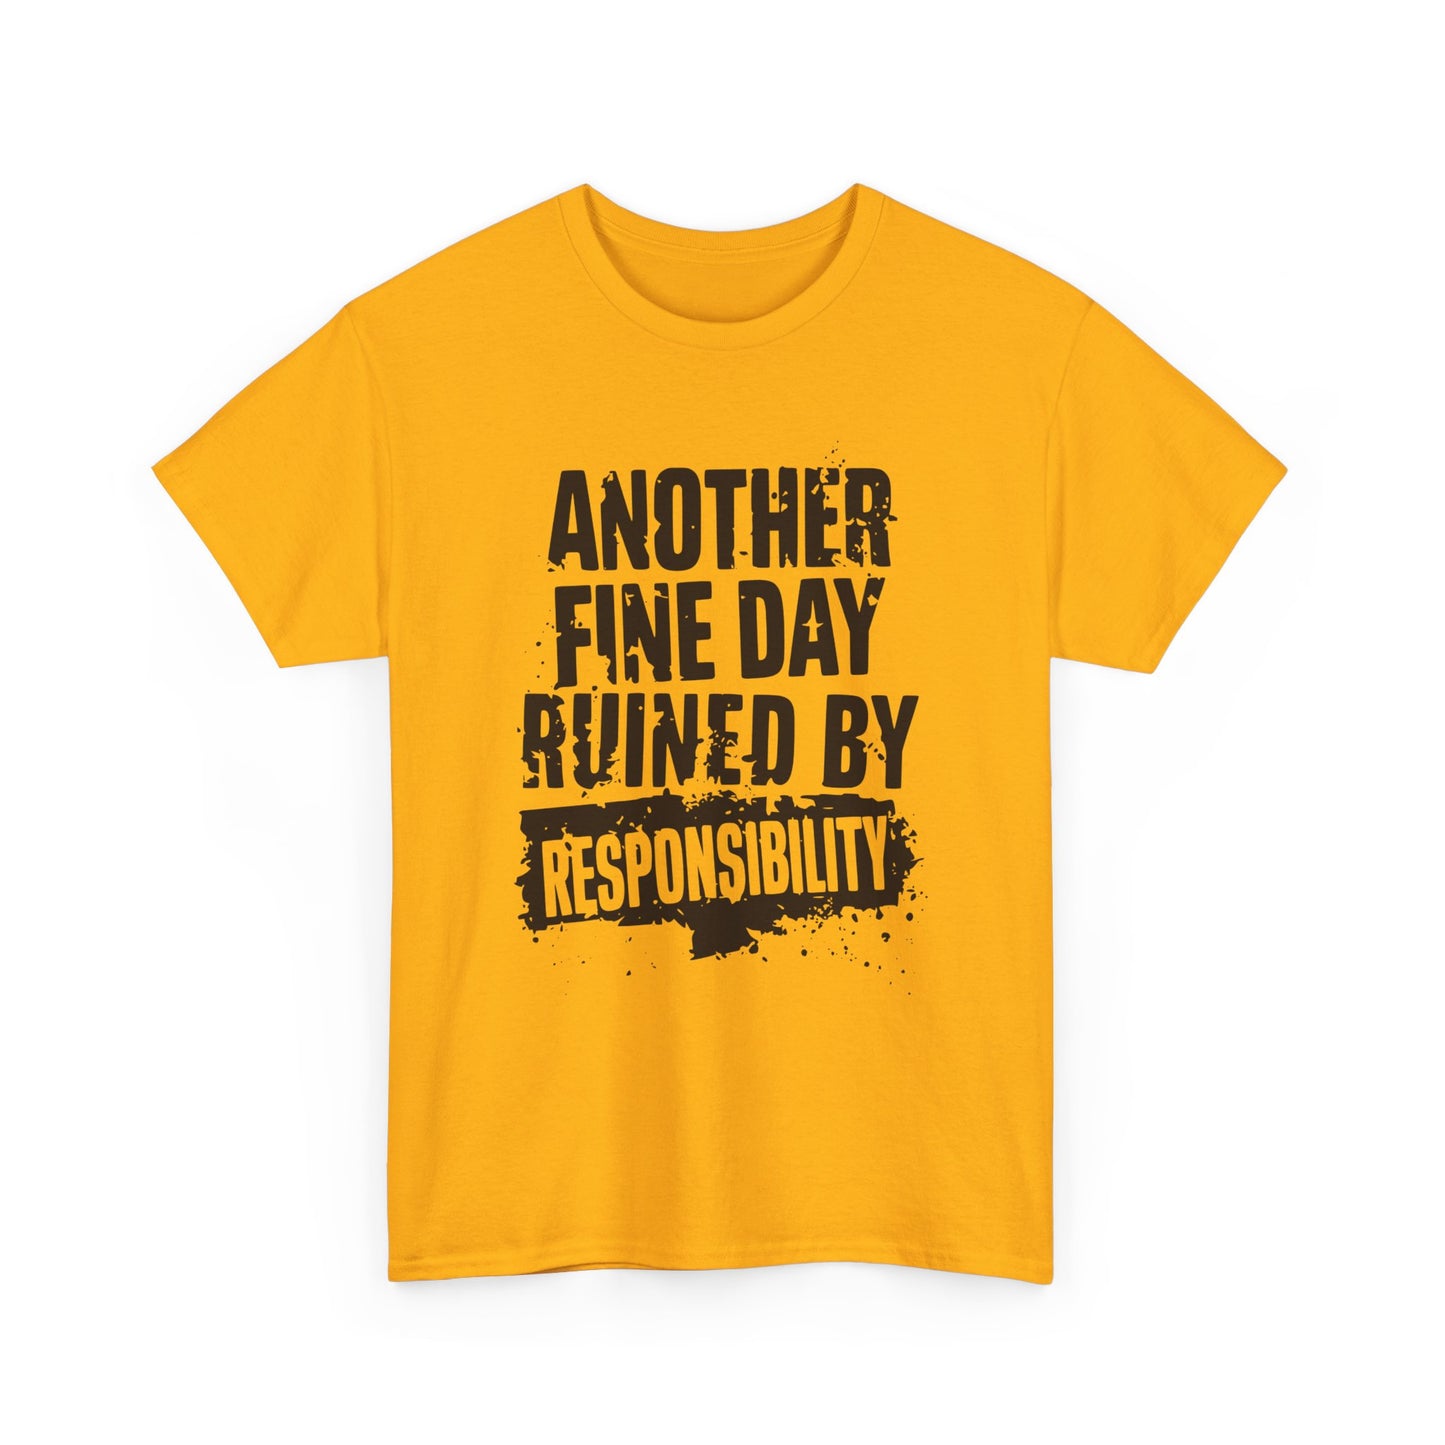 Another Day Ruined By Responsibility: T-Shirt